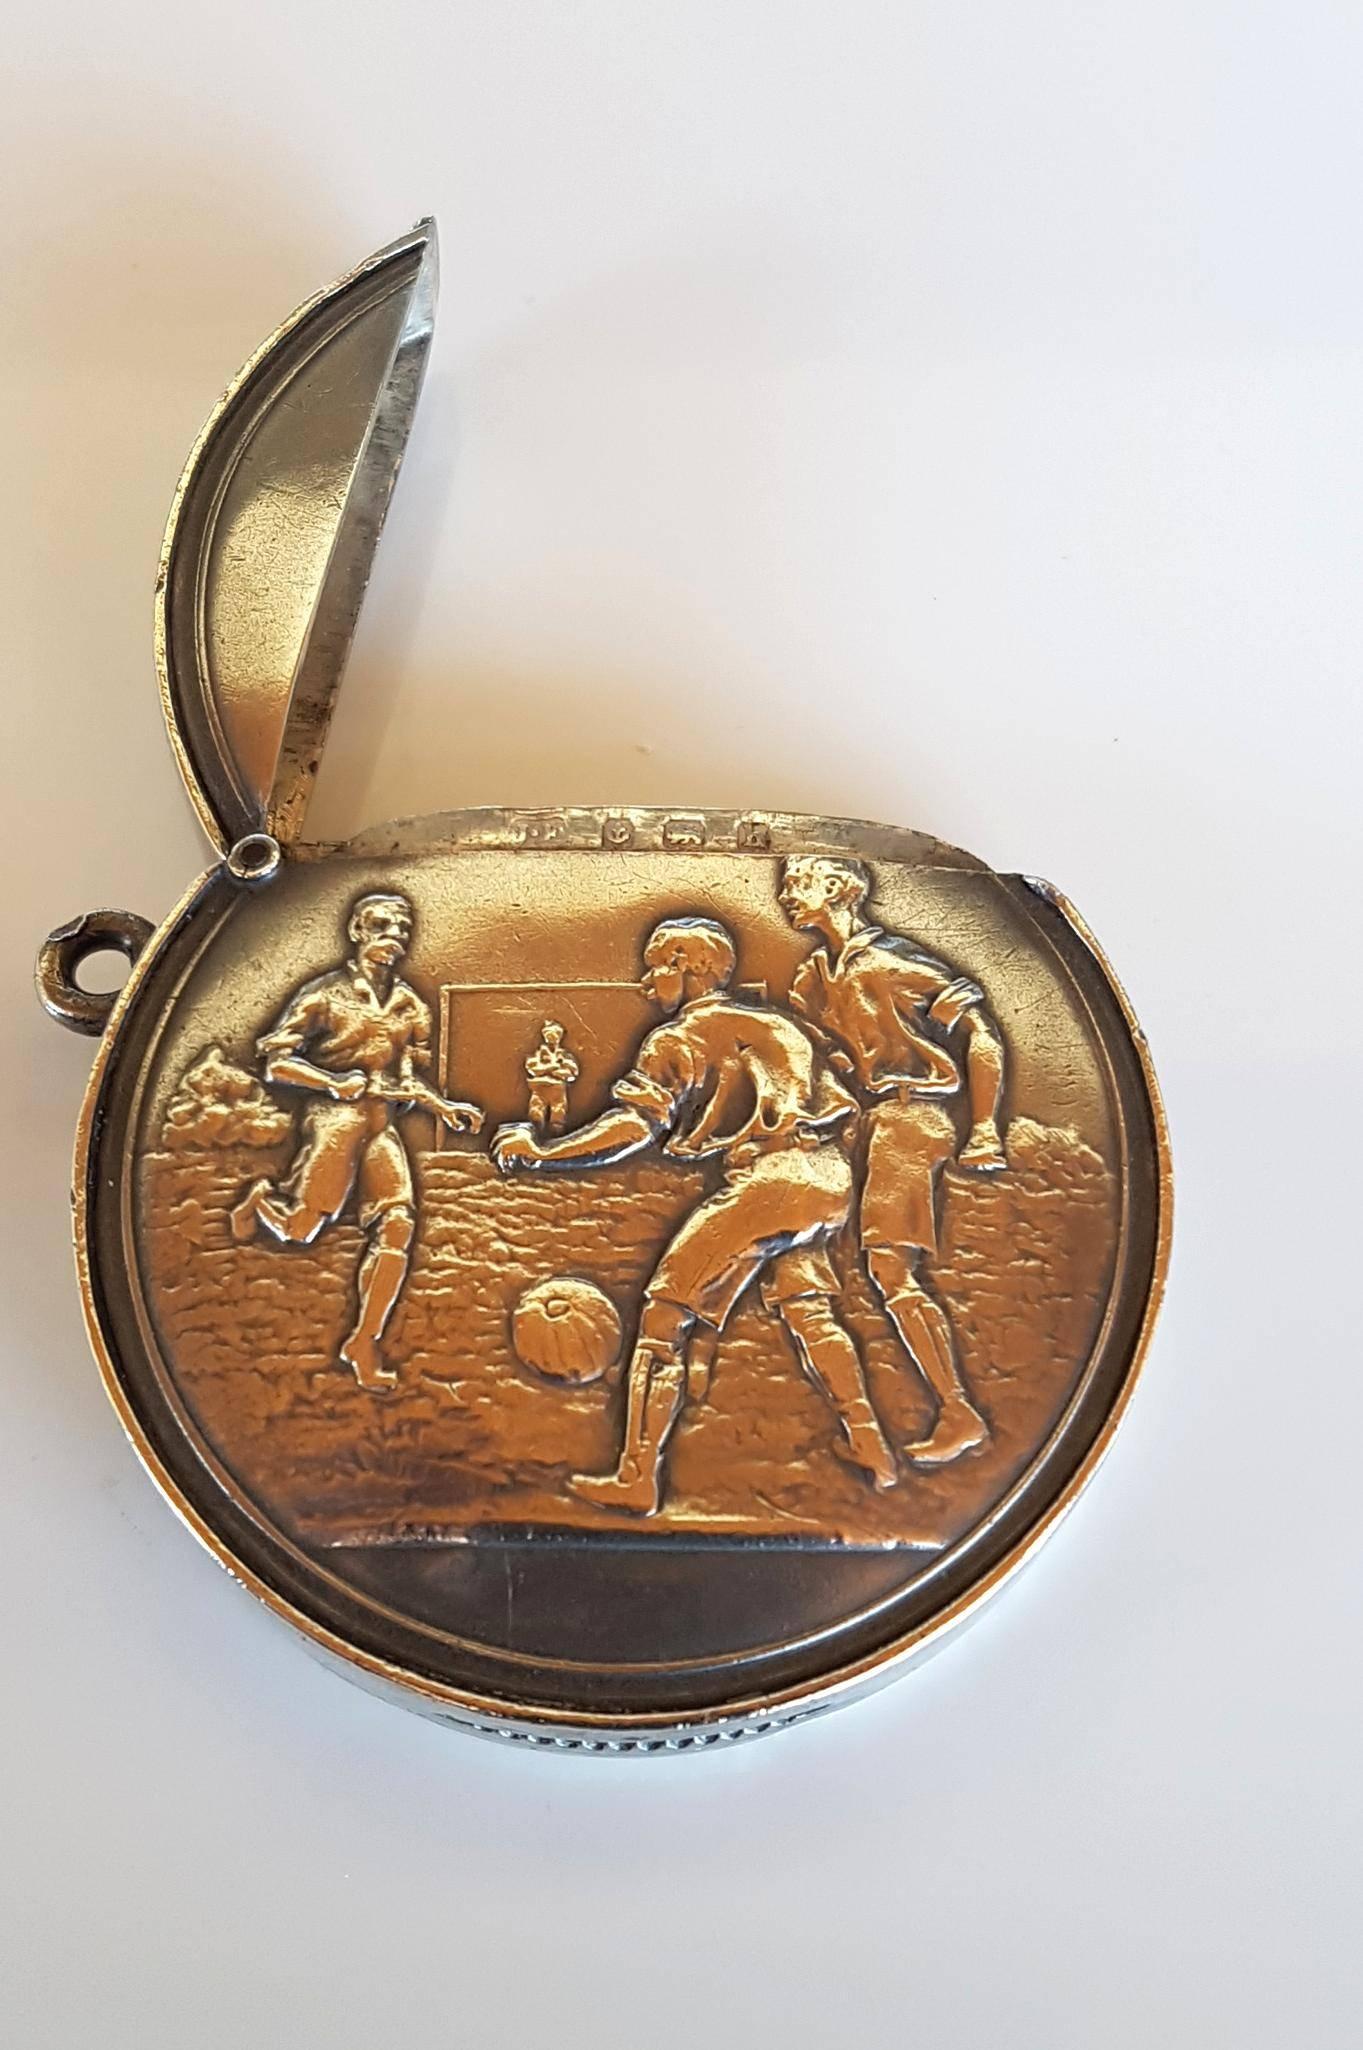 Rare sterling silver novelty vesta case with striker used for wax matches in the shape of a football with Edwardian football players carved in relief. Hallmarked for Birmingham 1907, Maker JH. Love the Edwardian fashion evident in the outfits and